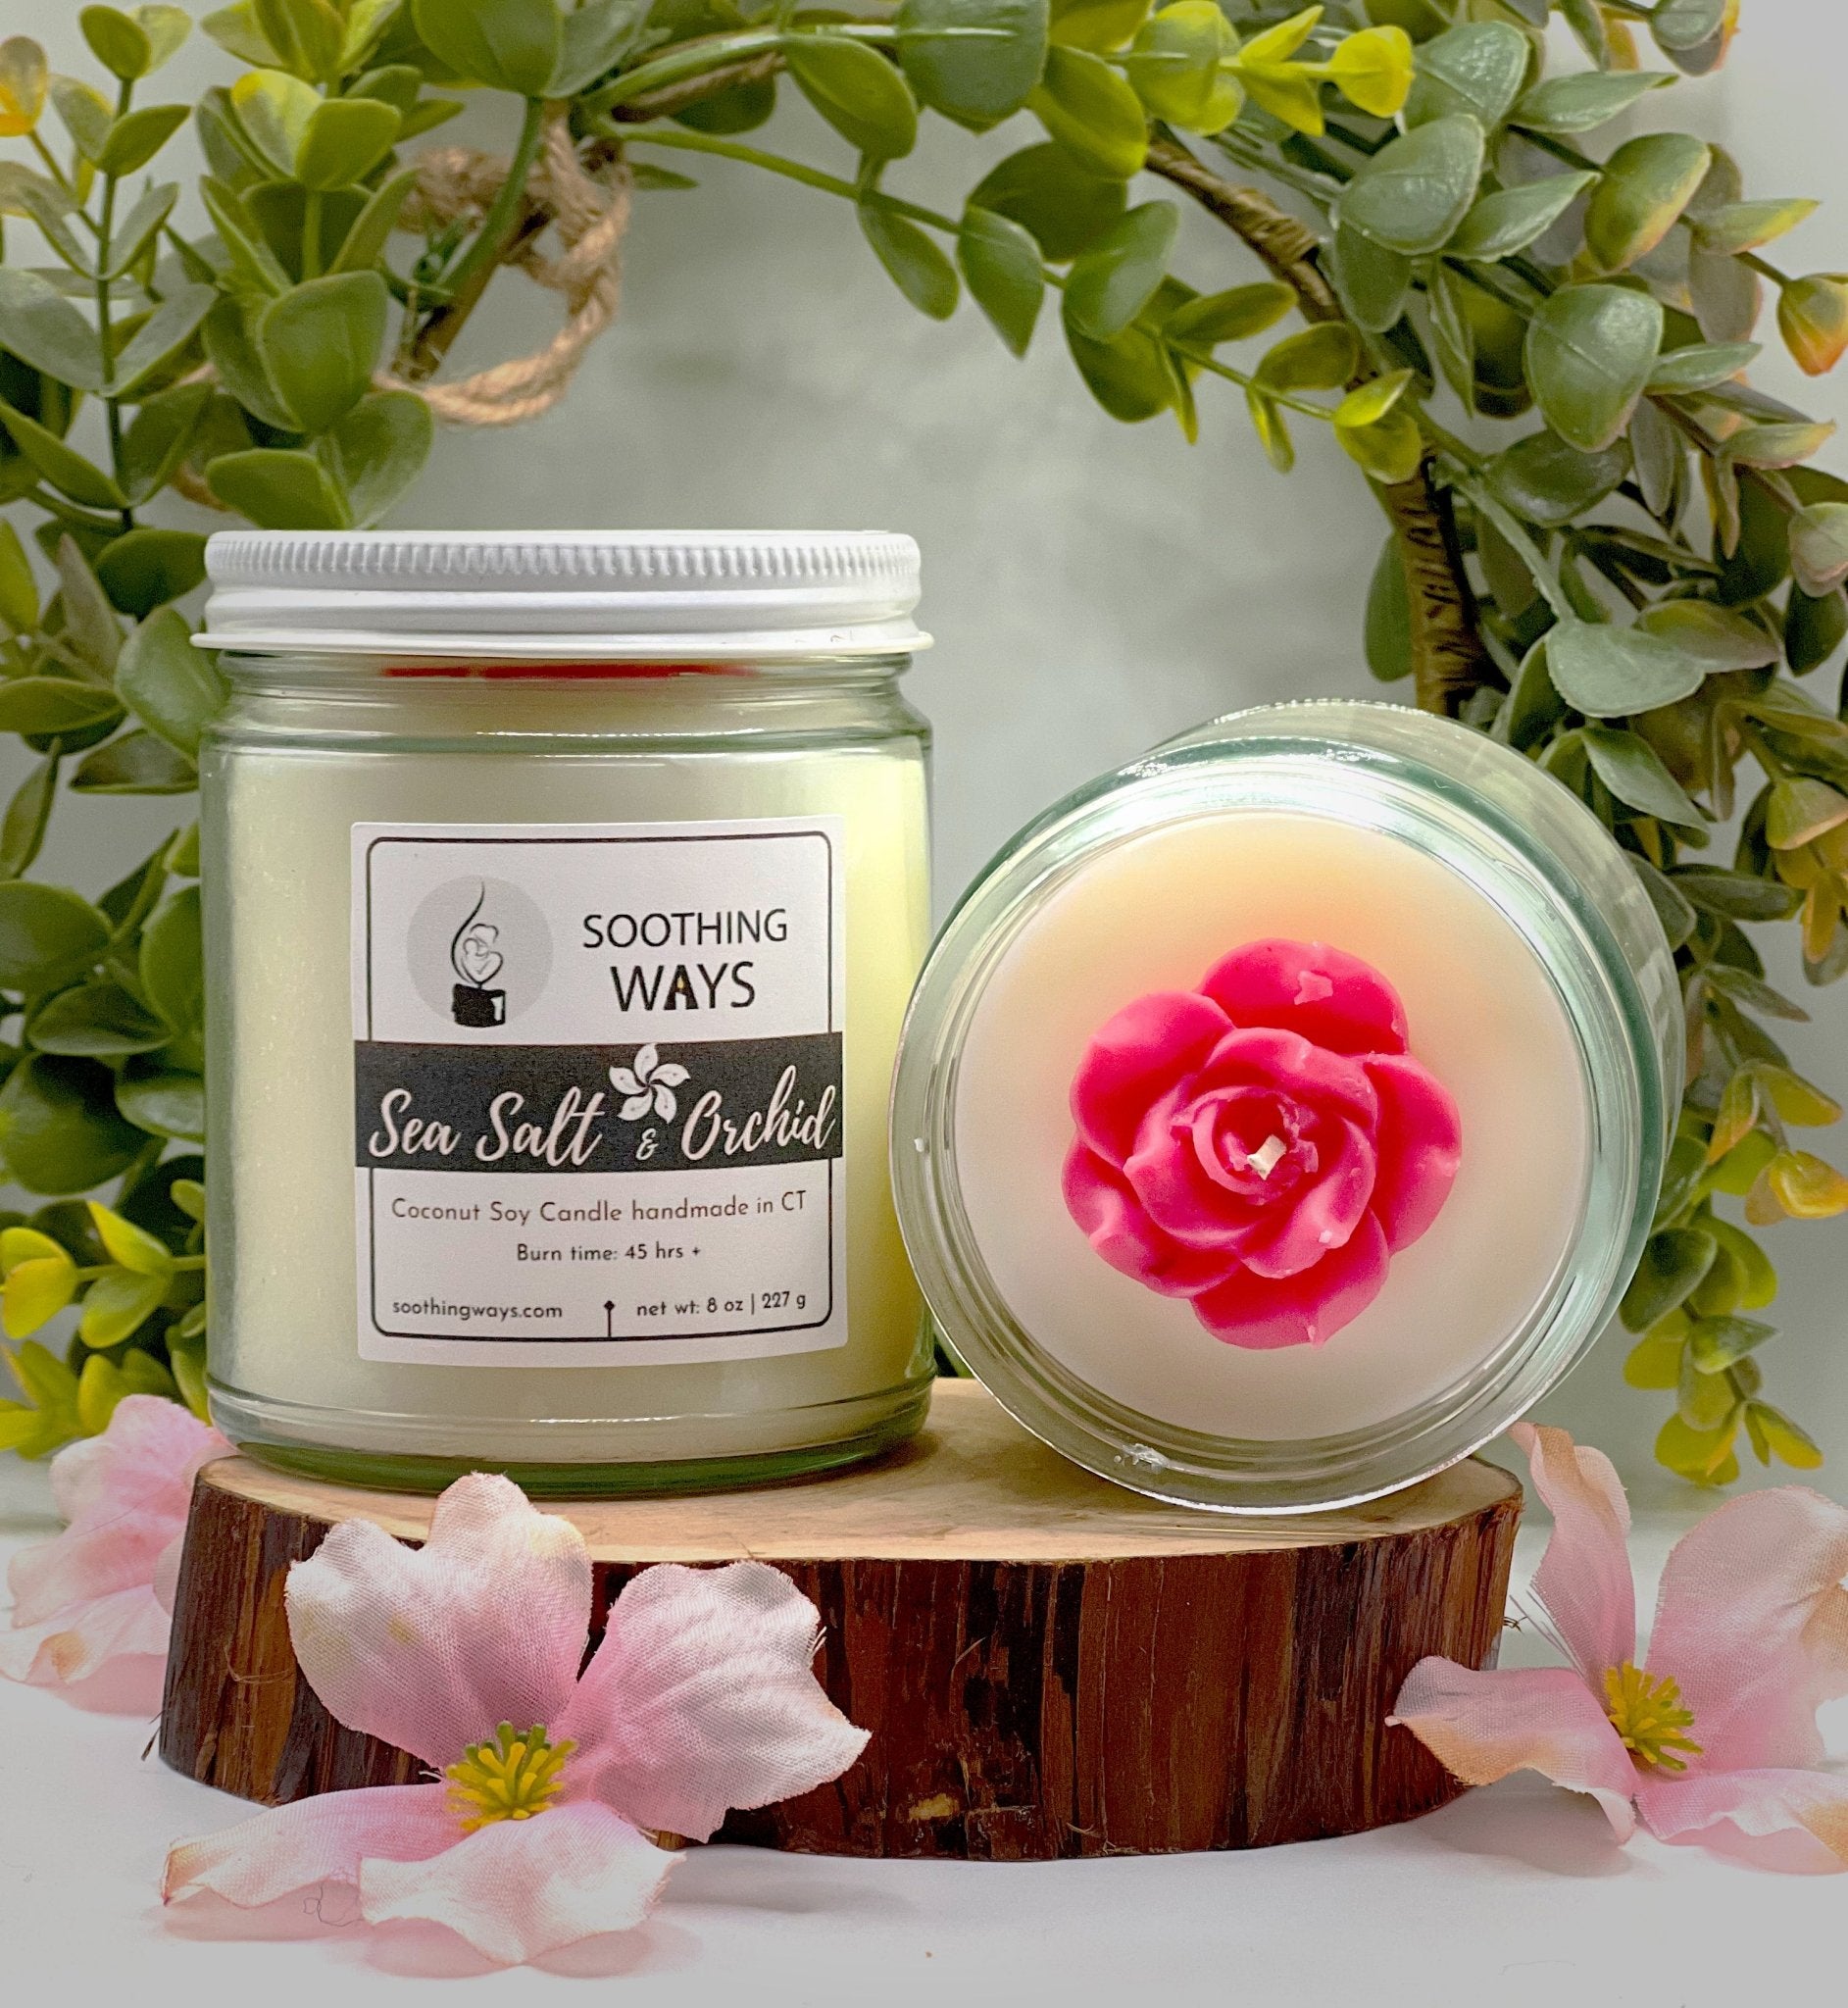 Sea Salt and Orchid - 8 oz Candle - Soothing Ways